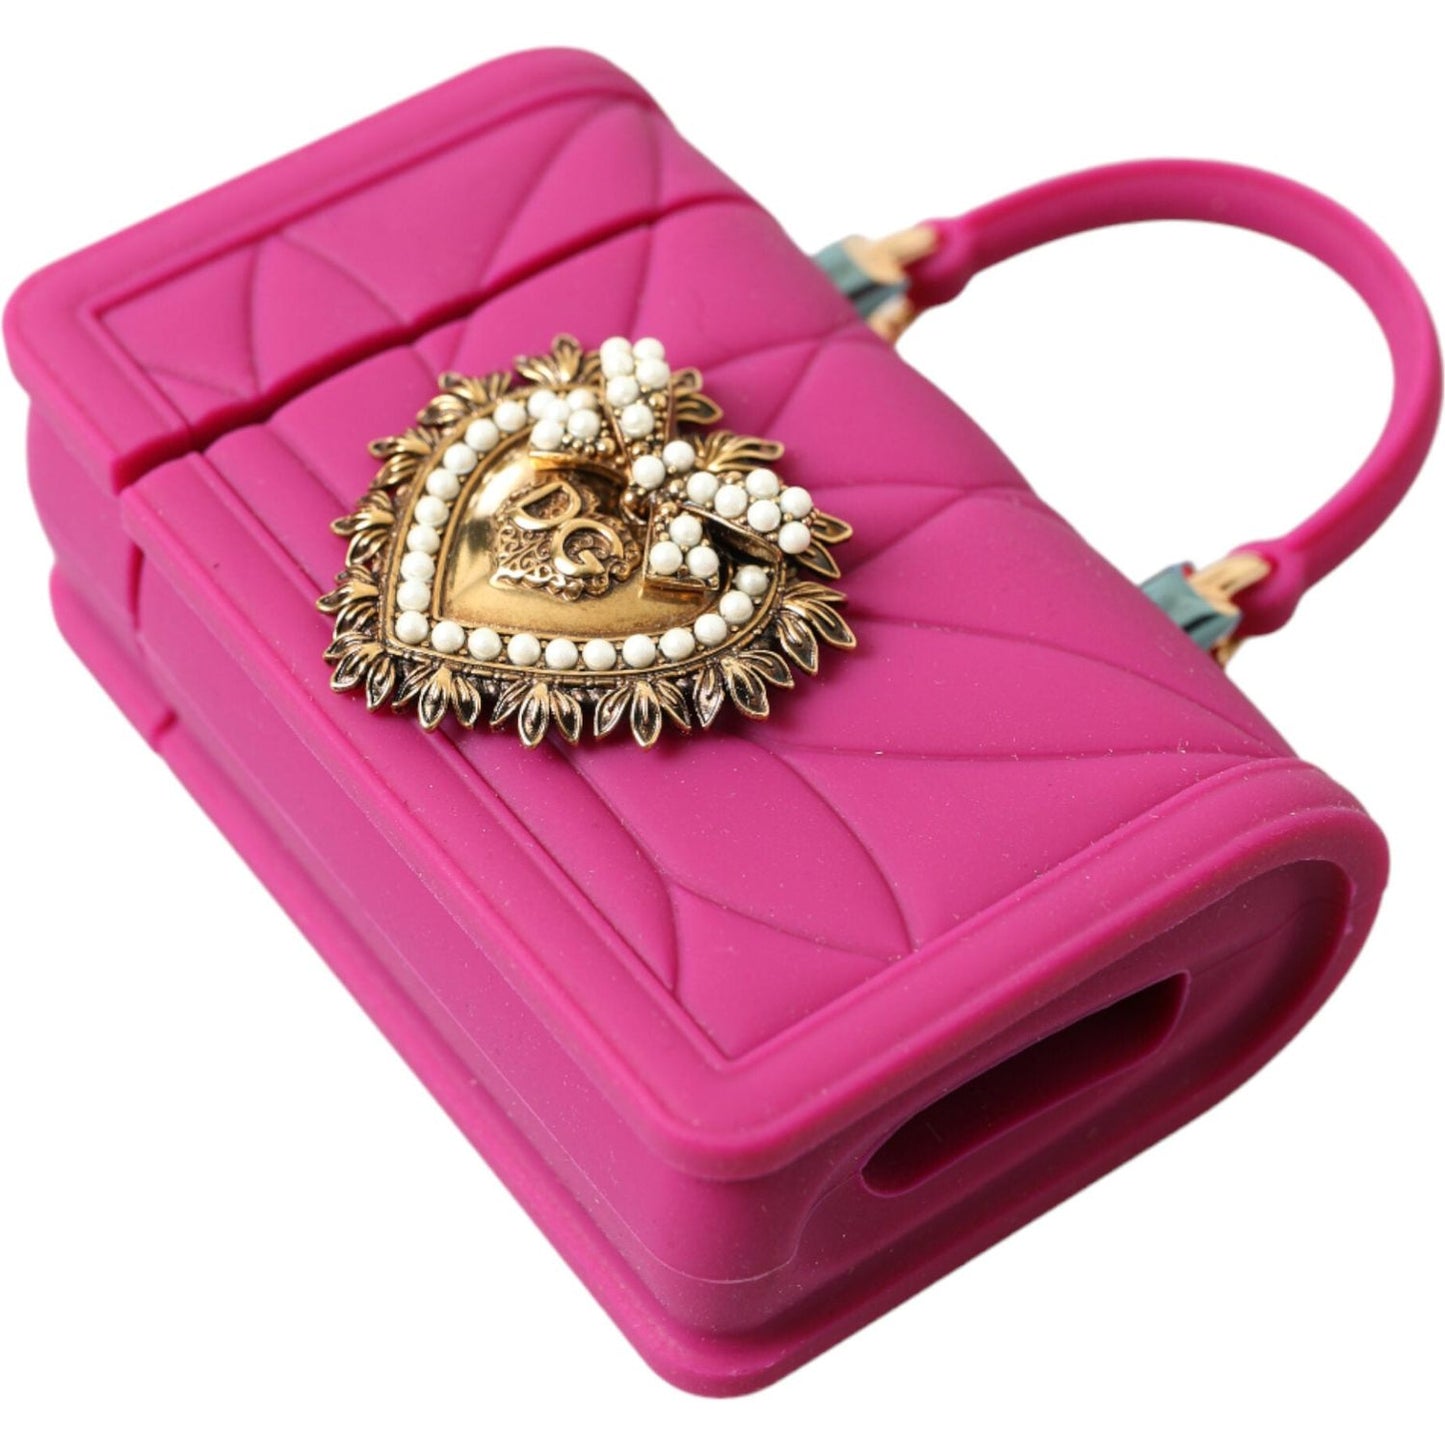 Dolce & Gabbana Chic Quilted Silicone Airpods Case - Pink & Gold pink-silicone-devotion-heart-bag-gold-chain-airpods-case